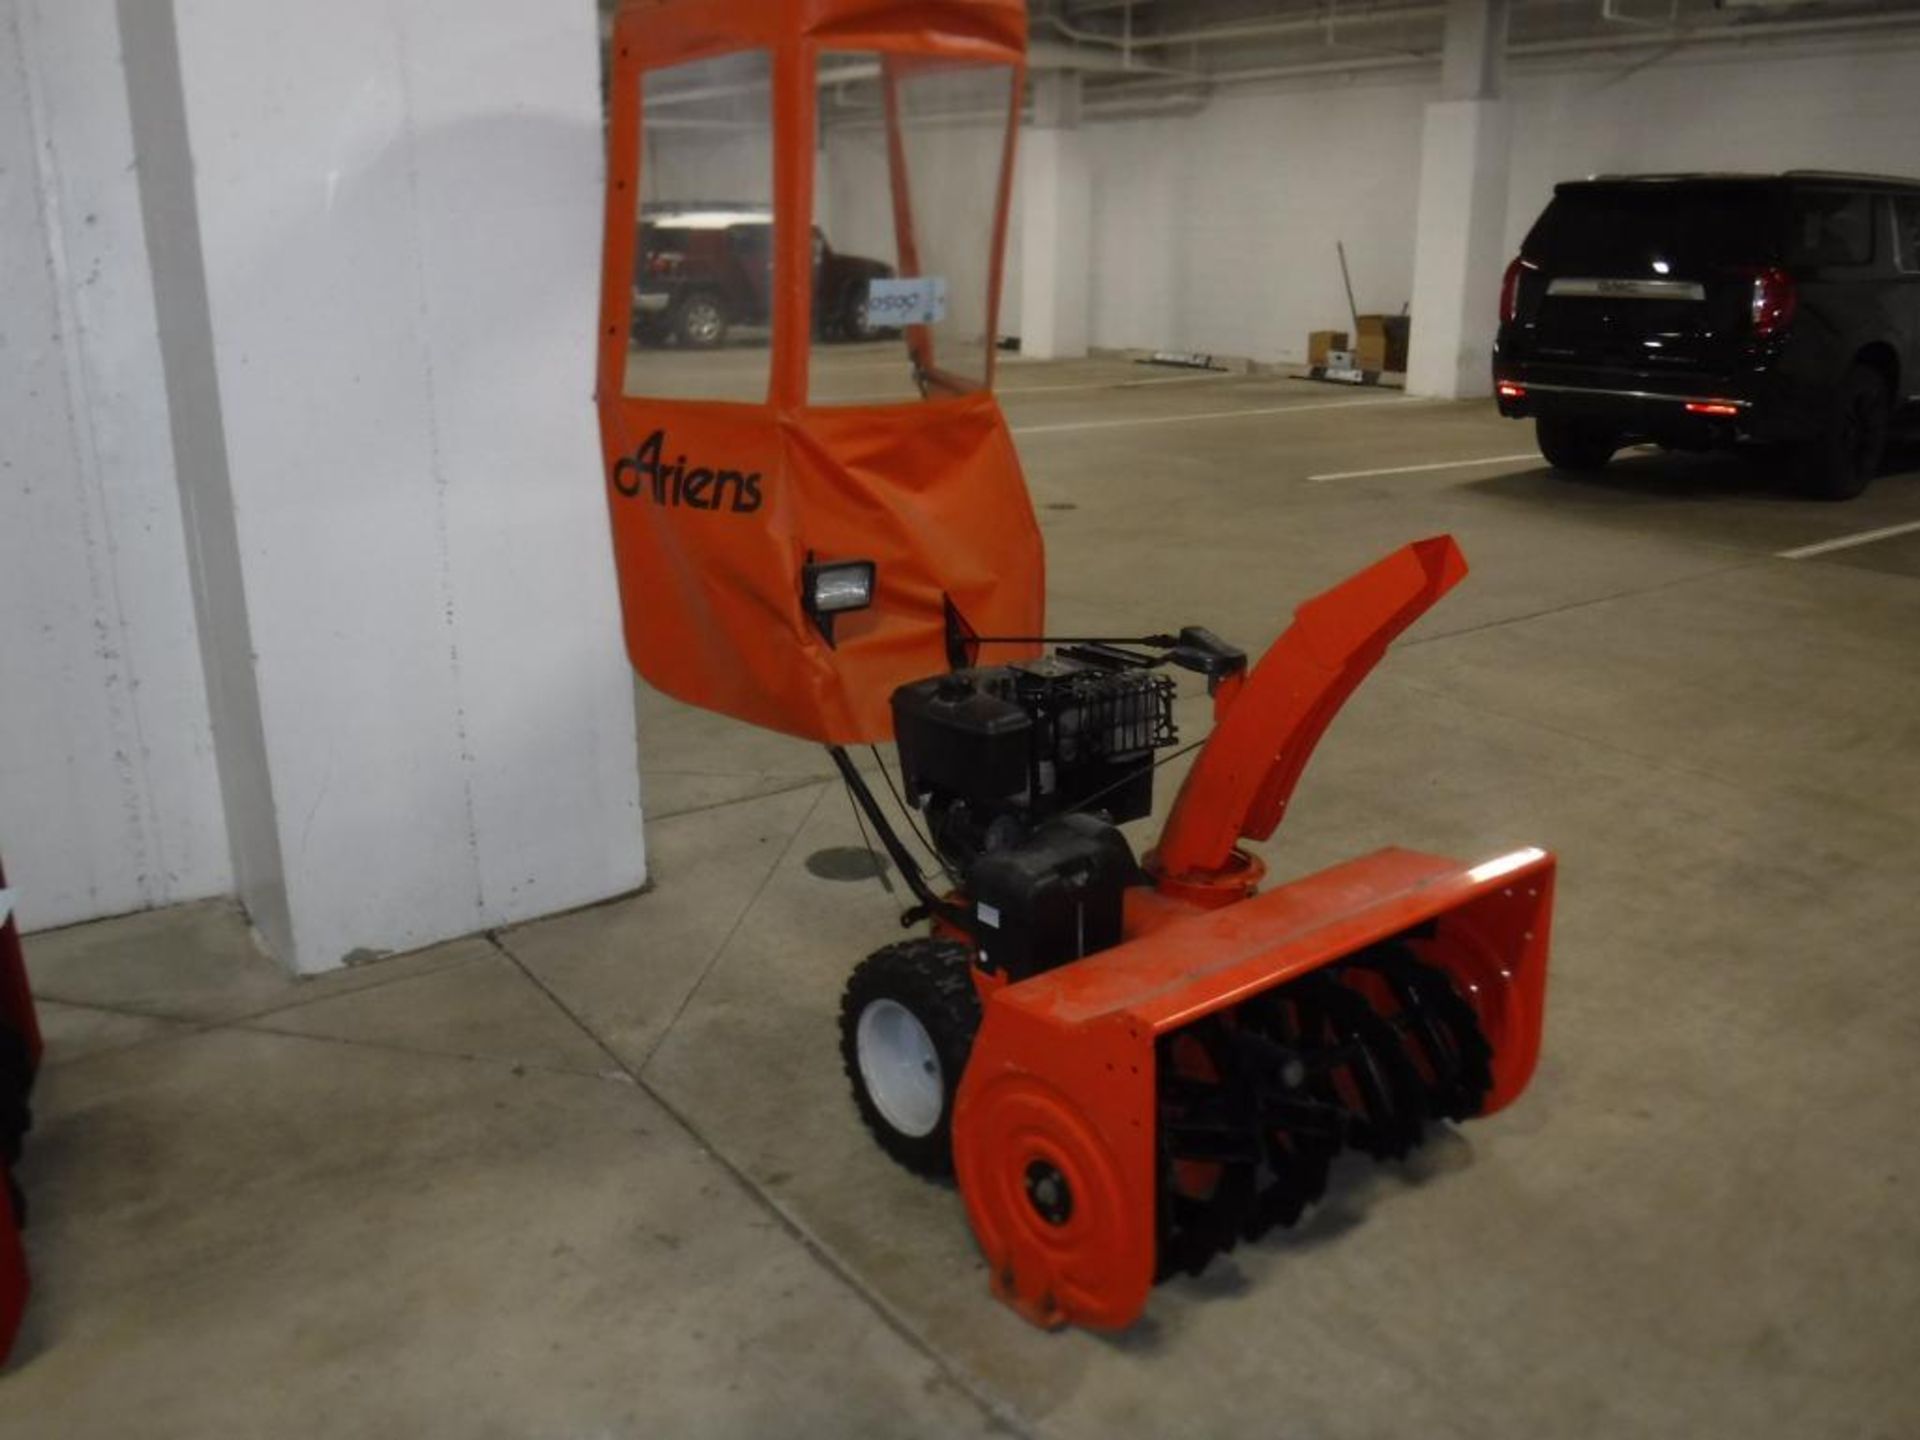 Ariens 36" ST1336LE Professional Gas Powered Walk-Behind Snow Thrower S/N: 001048, Canopy, Catolog M - Image 2 of 2